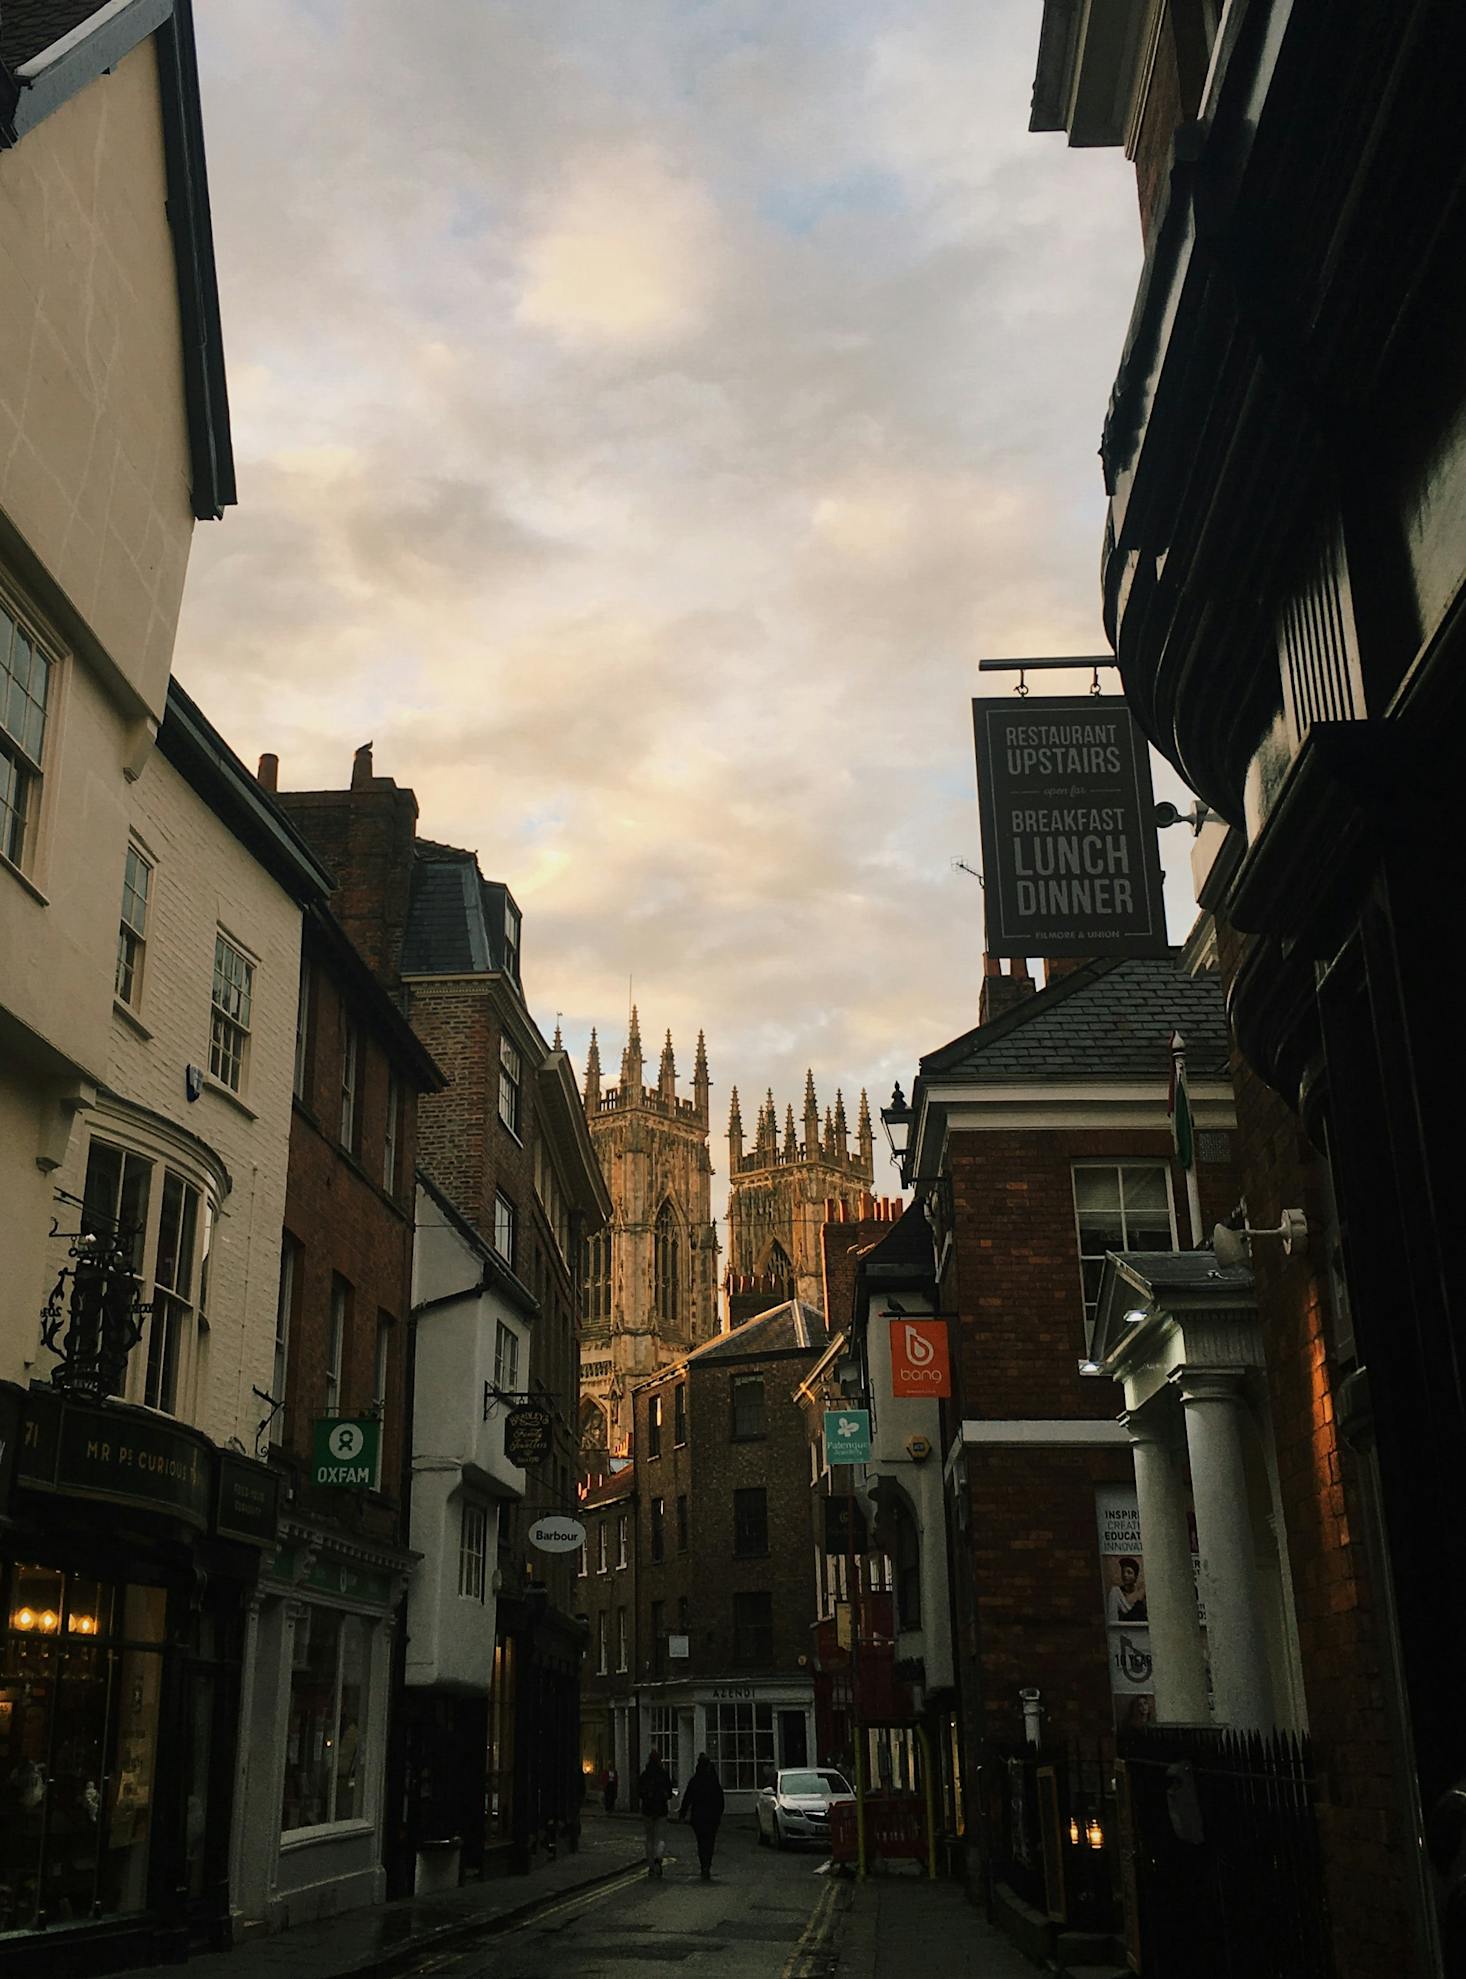 Glimpse of York Minster at Sunset